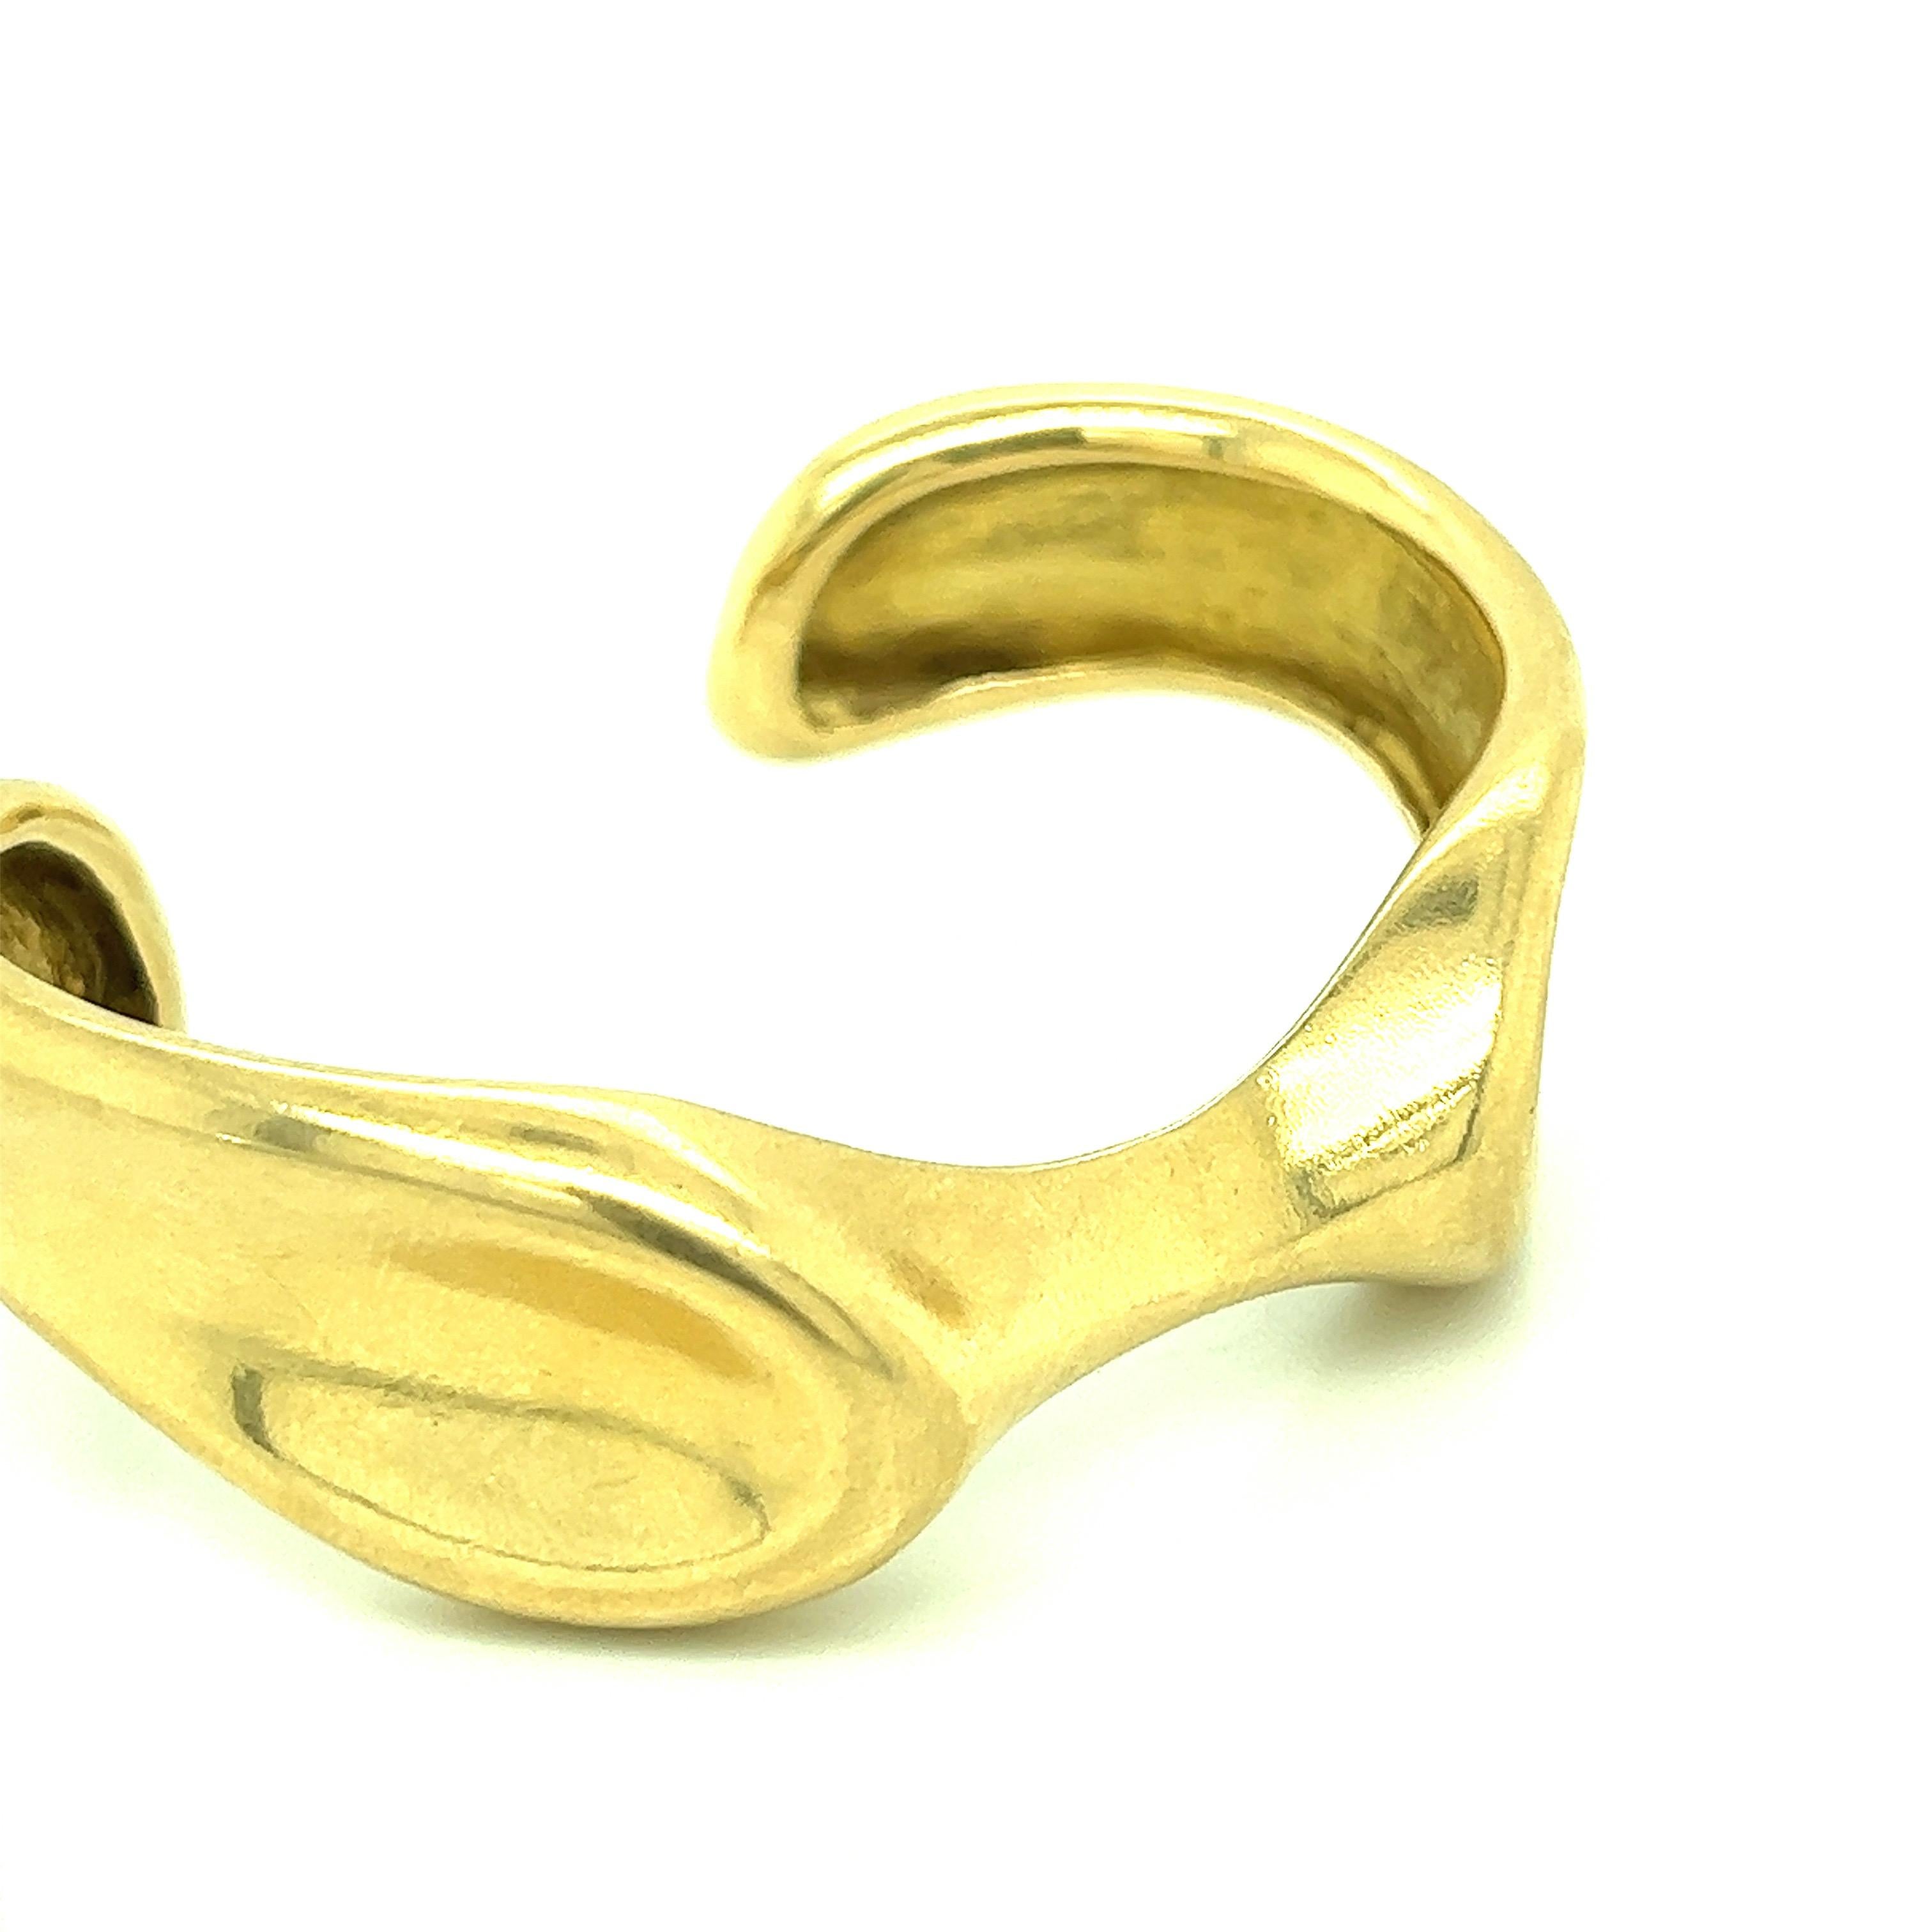 Elsa Peretti for Tiffany & Co. 18 karat yellow gold bangle. Marked: Tiffany & Co. / 18k / Peretti. Inner circumference: 6.25 inches. Total weight: 53.7 grams. Width: 2.63 inches. Length: 2 inches. 